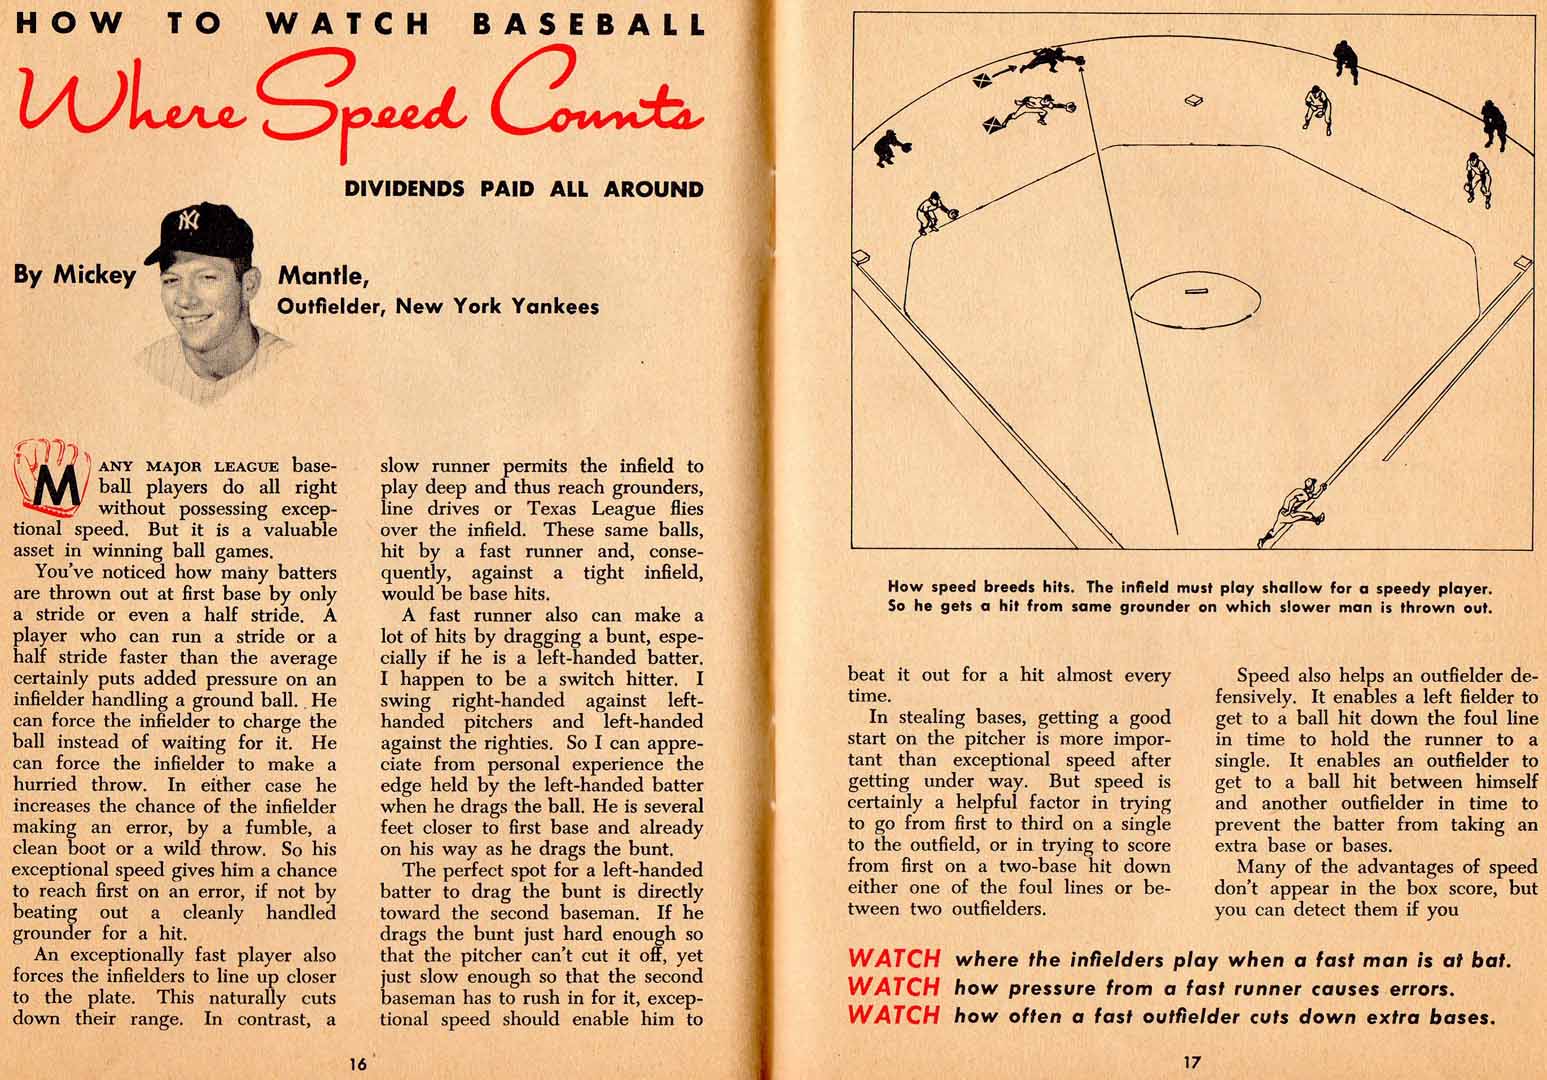 1953 phillips 66 how to watch baseball